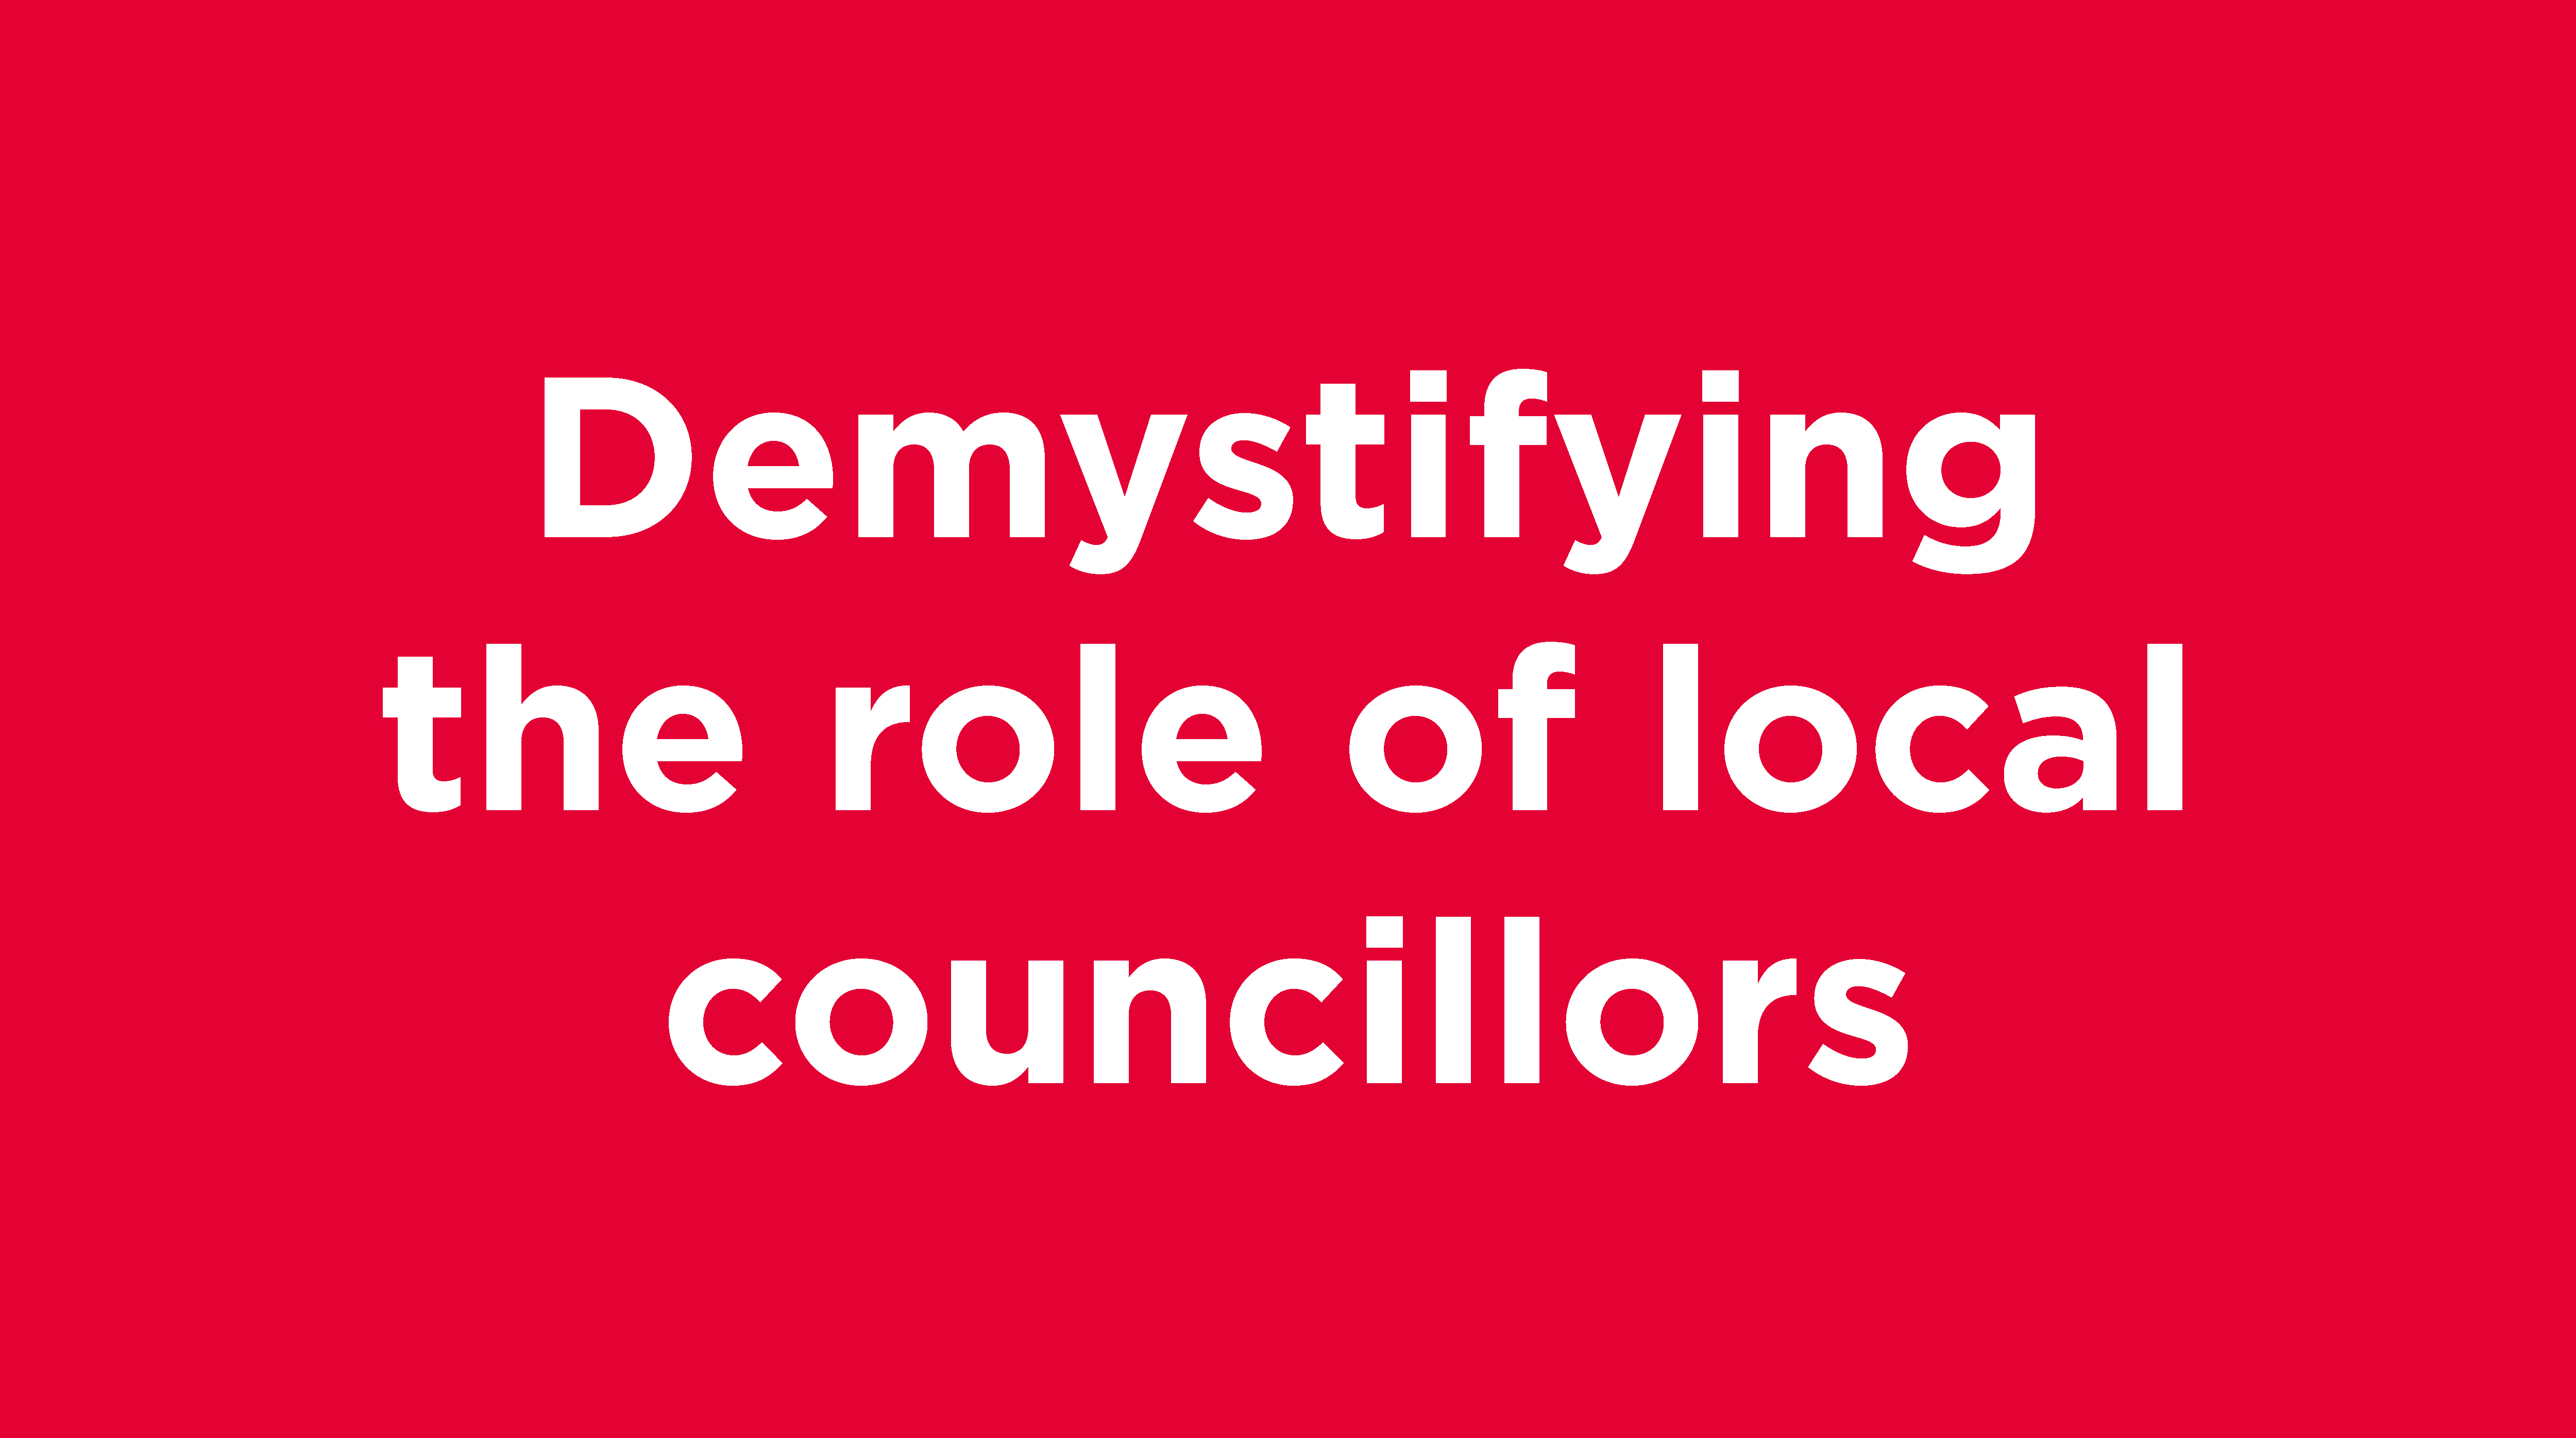 Demystifying-the-role-of-local-councillors